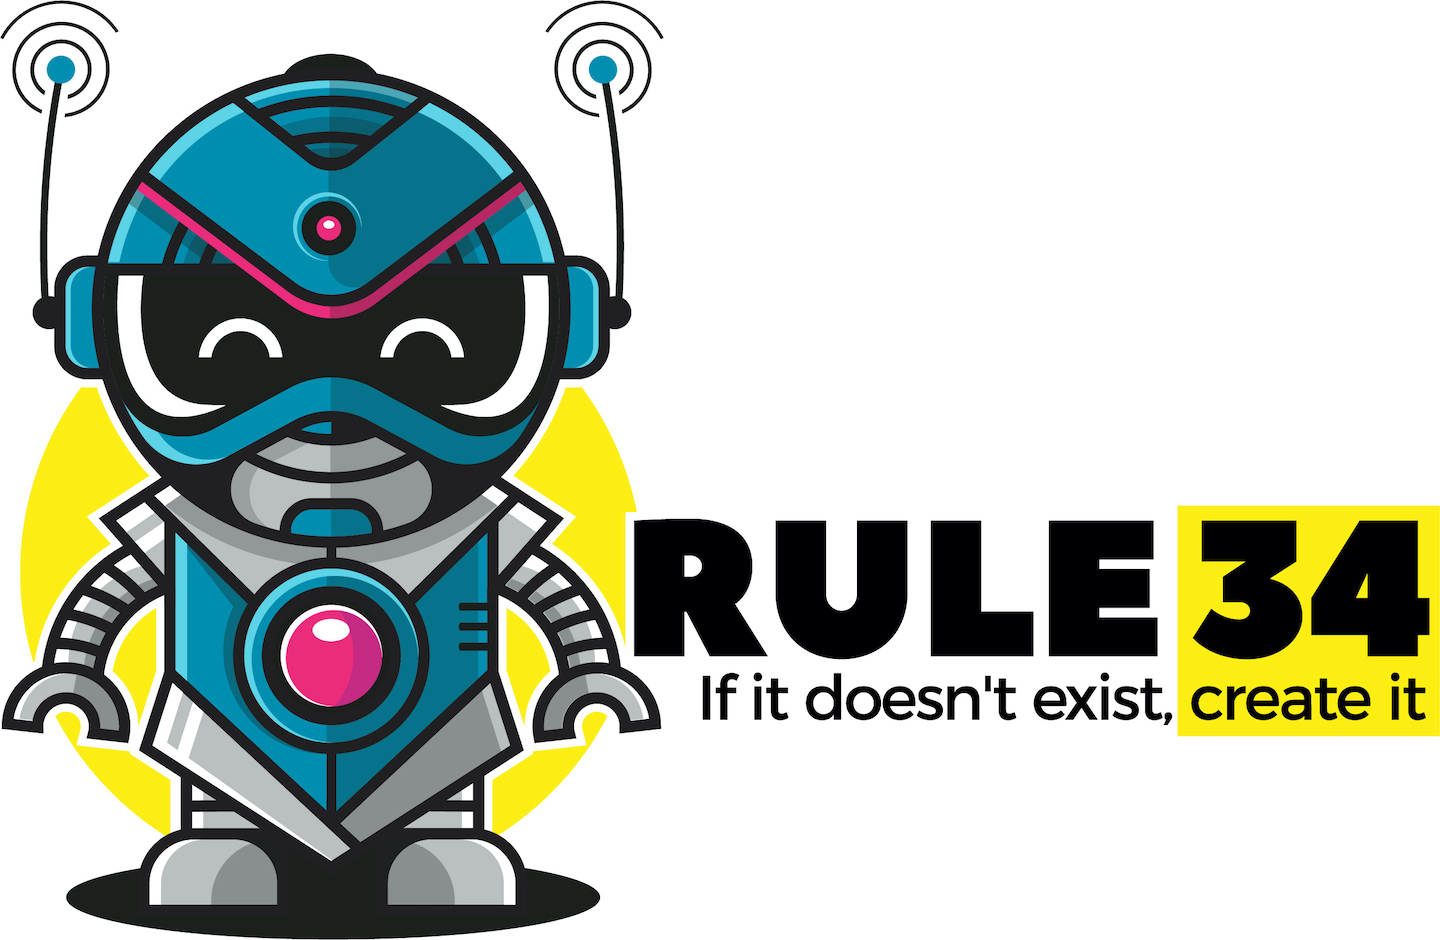 Rule 34 Web App Launches Allows Users To Create Their Own Image Boards 3081